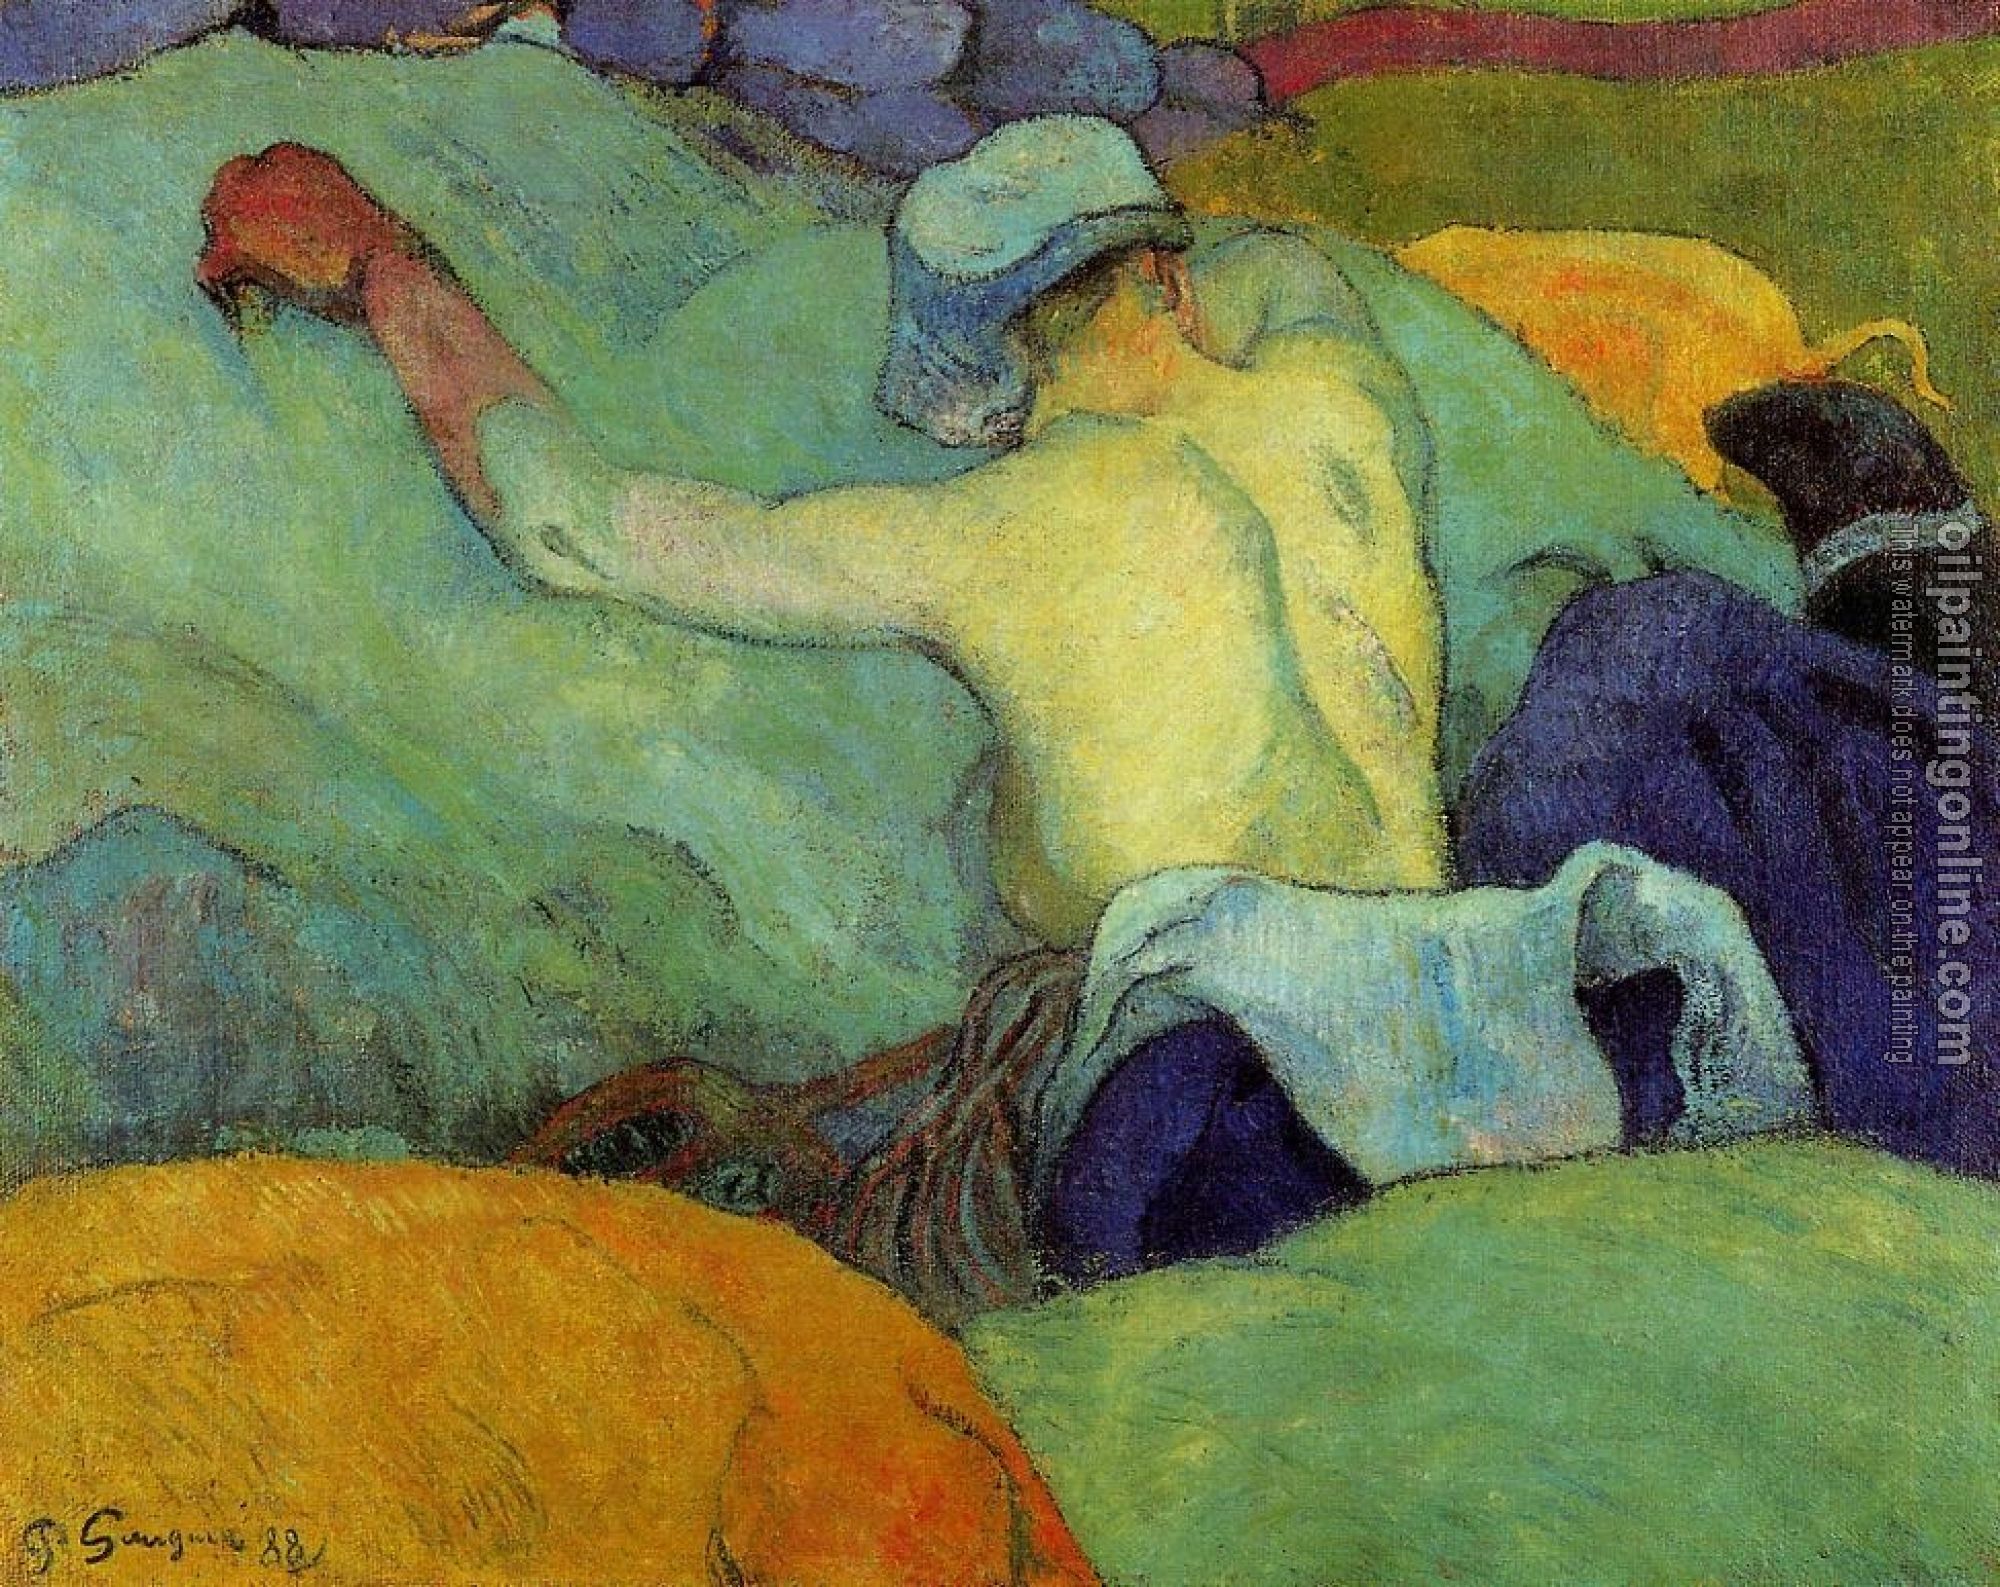 Gauguin, Paul - In the Heat of the Day